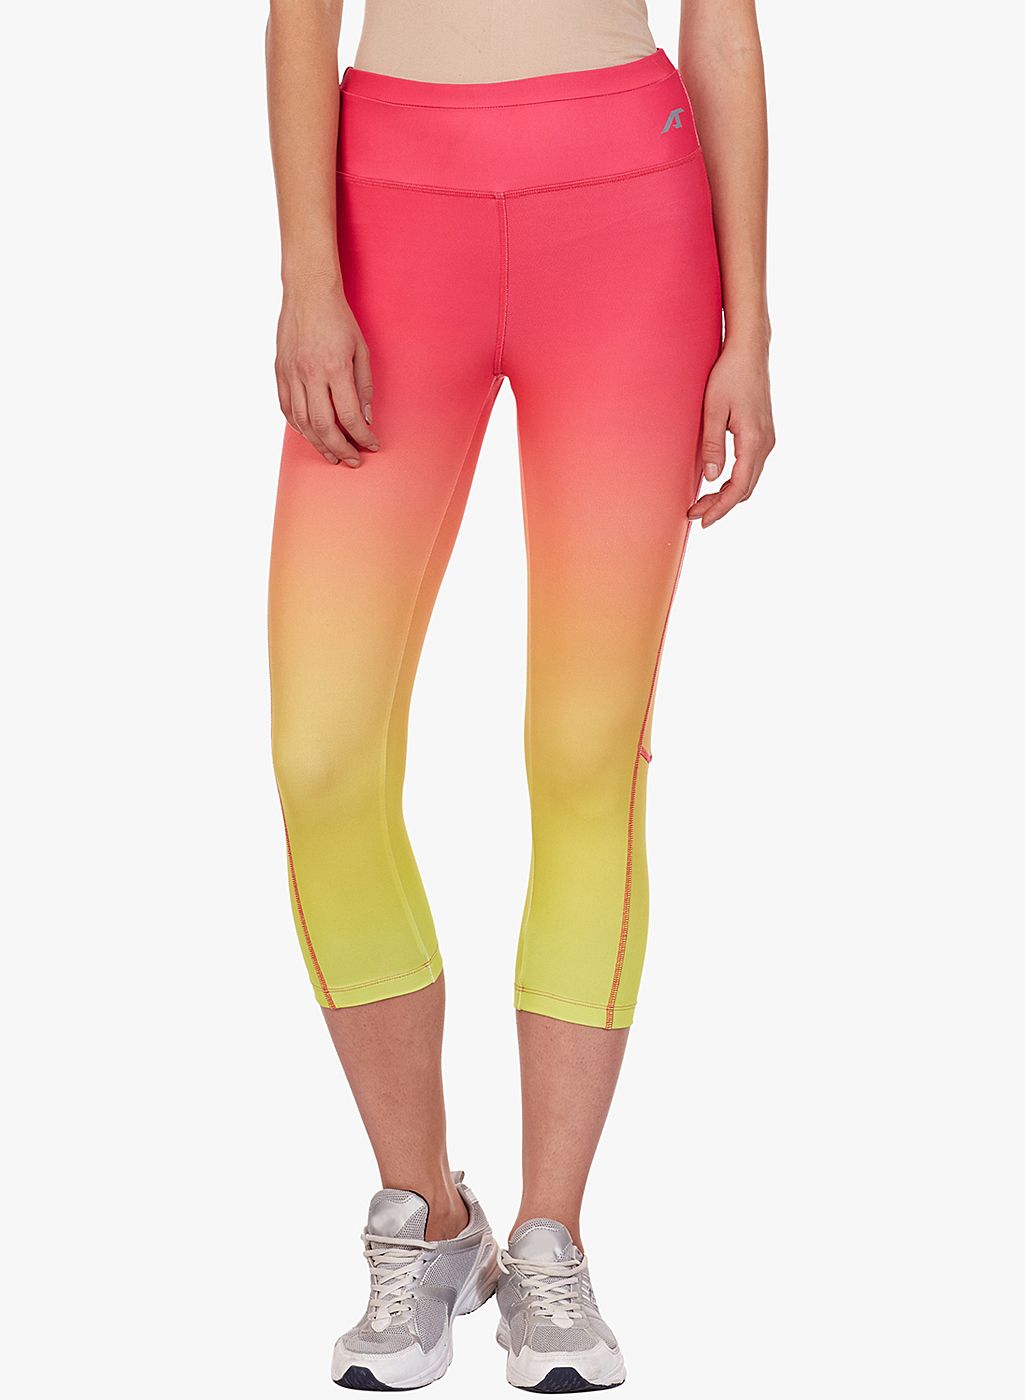 Alcis Women Pink & Yellow Gradation Tights Price in India